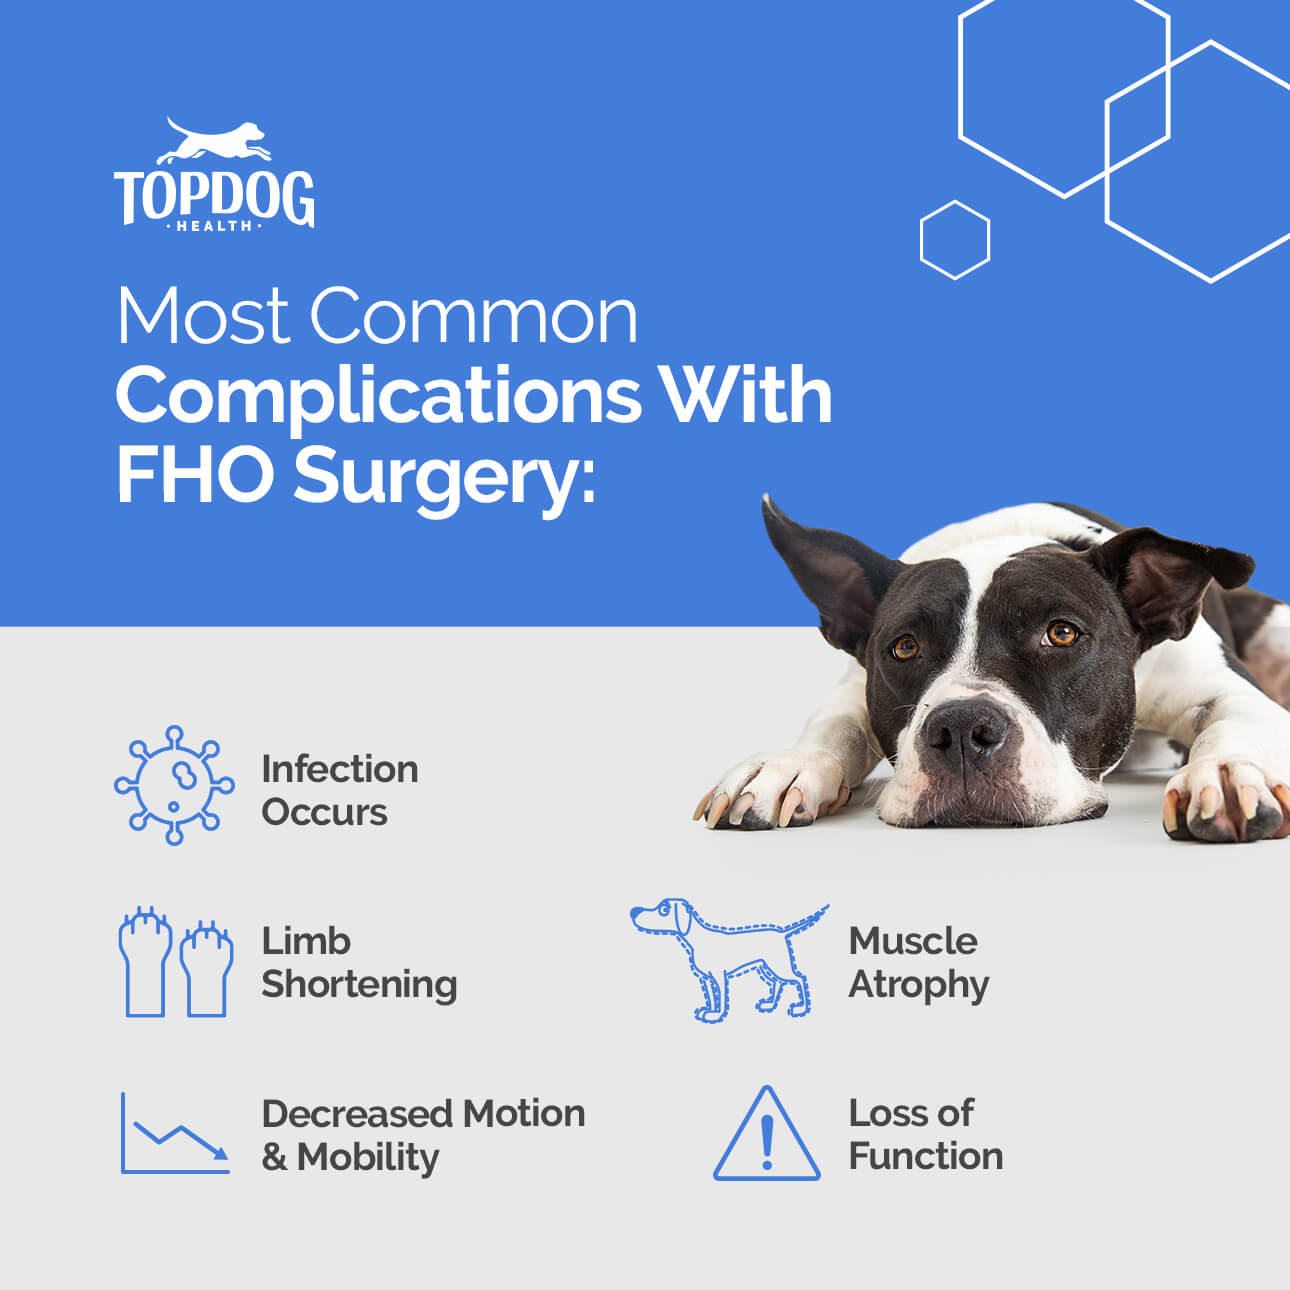 FHO surgery complications: Most common are decreased range of motion and mobility in the leg, muscle atrophy, loss of function, limb shortening and infection.